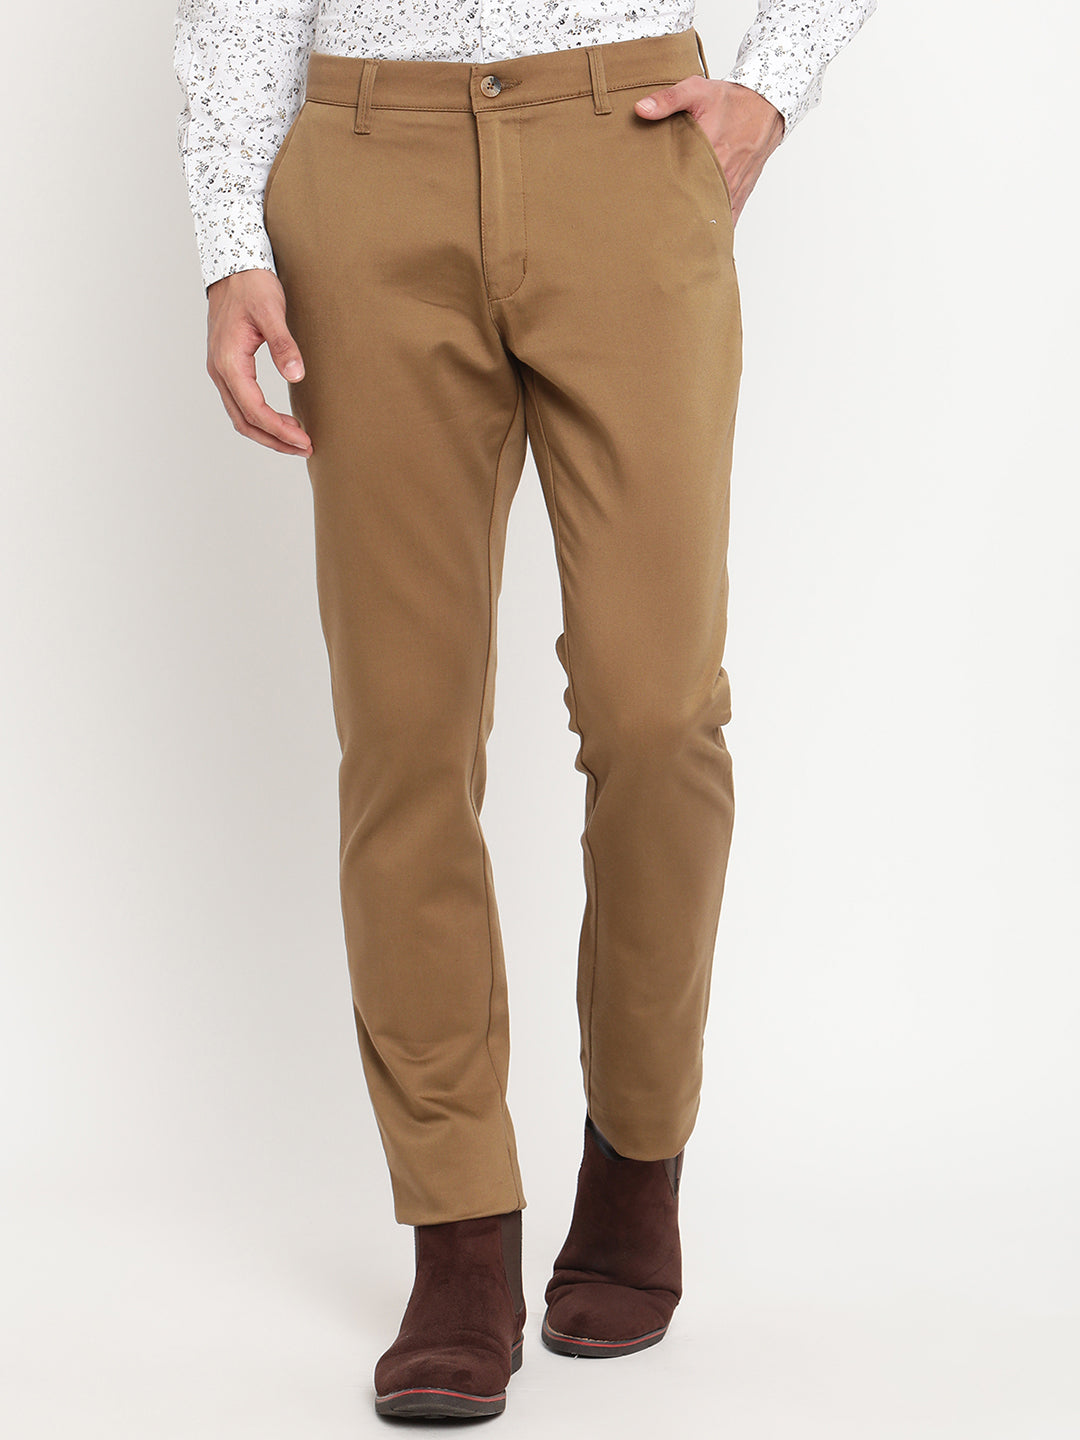 Buy Cantabil Men Olive Cotton Regular Fit Casual Trouser  (MTRC00039_Olive_40) at Amazon.in